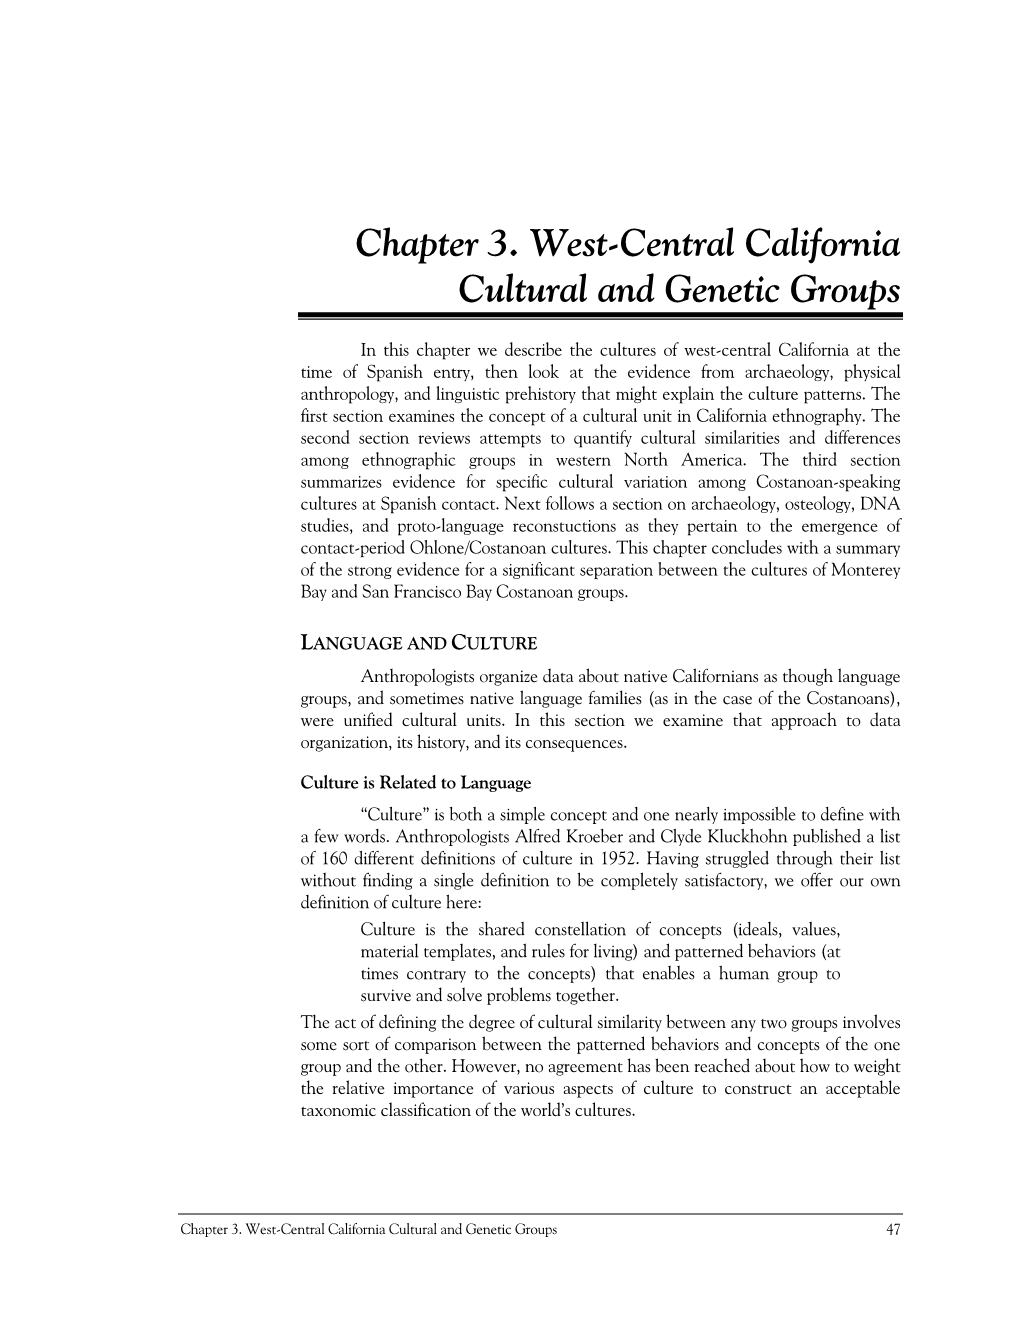 Chapter 3. West-Central California Cultural and Genetic Groups